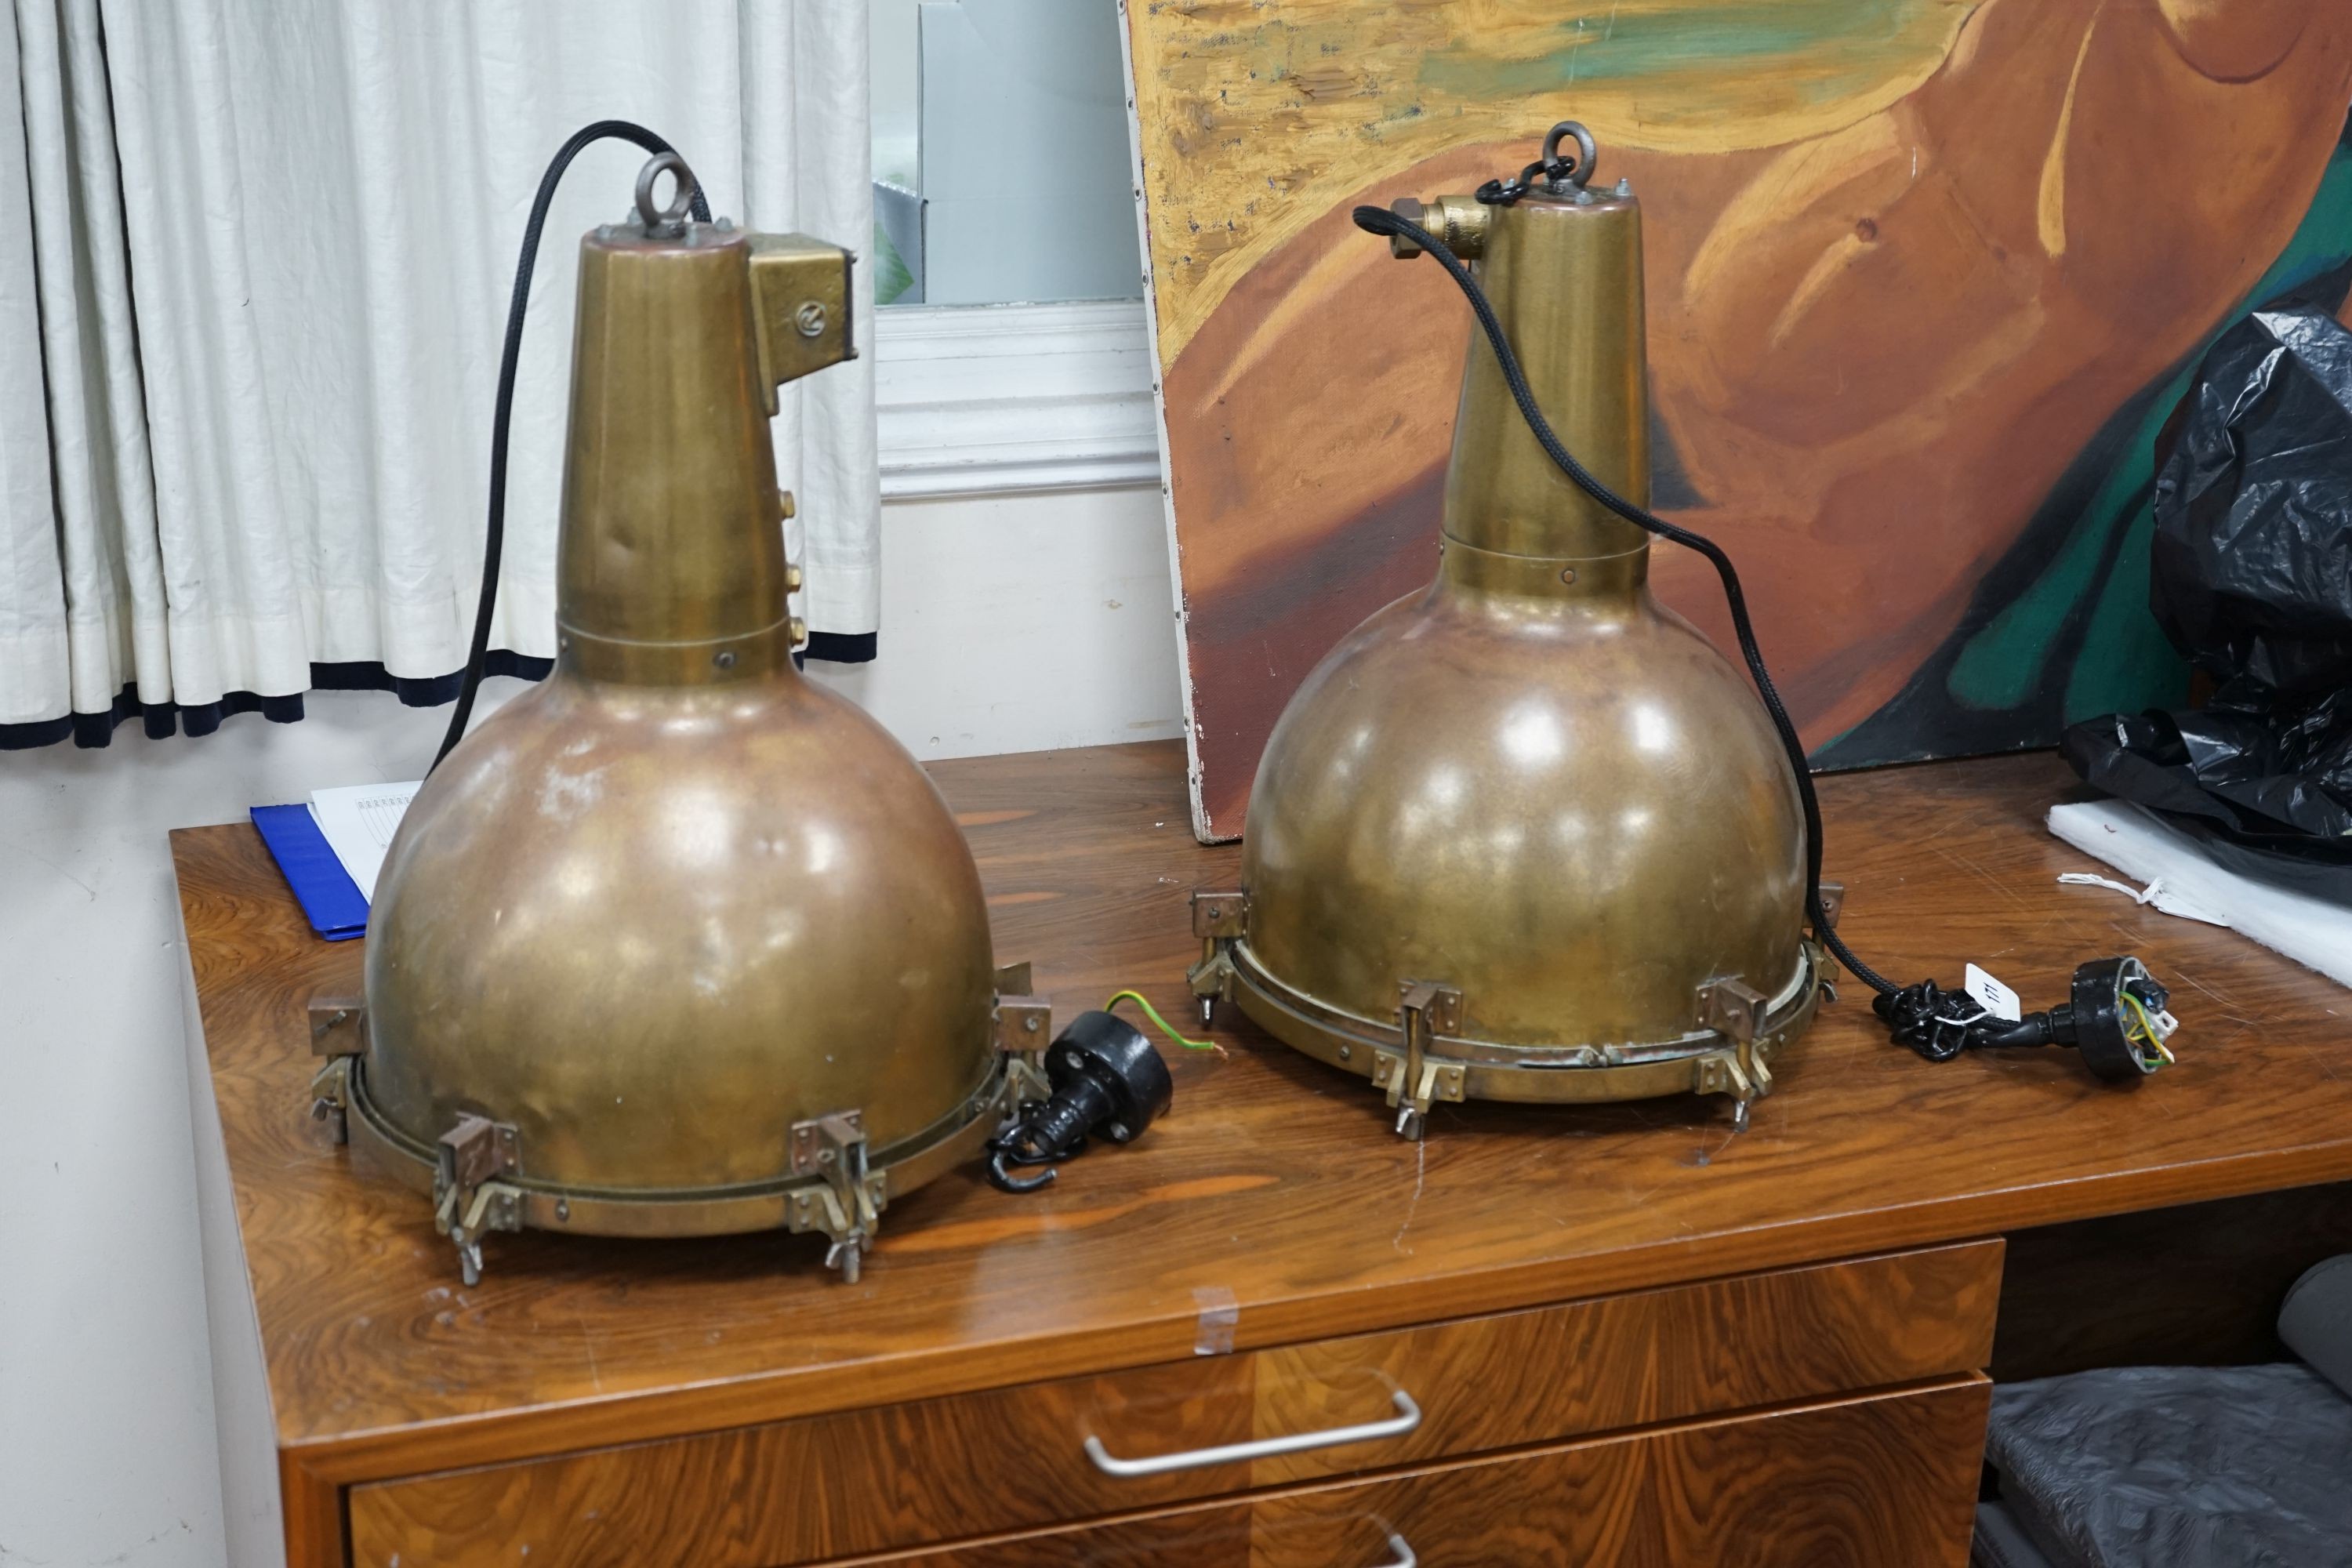 A pair of vintage industrial copper and brass ceiling lights, ex Japanese ship. Height 48cm